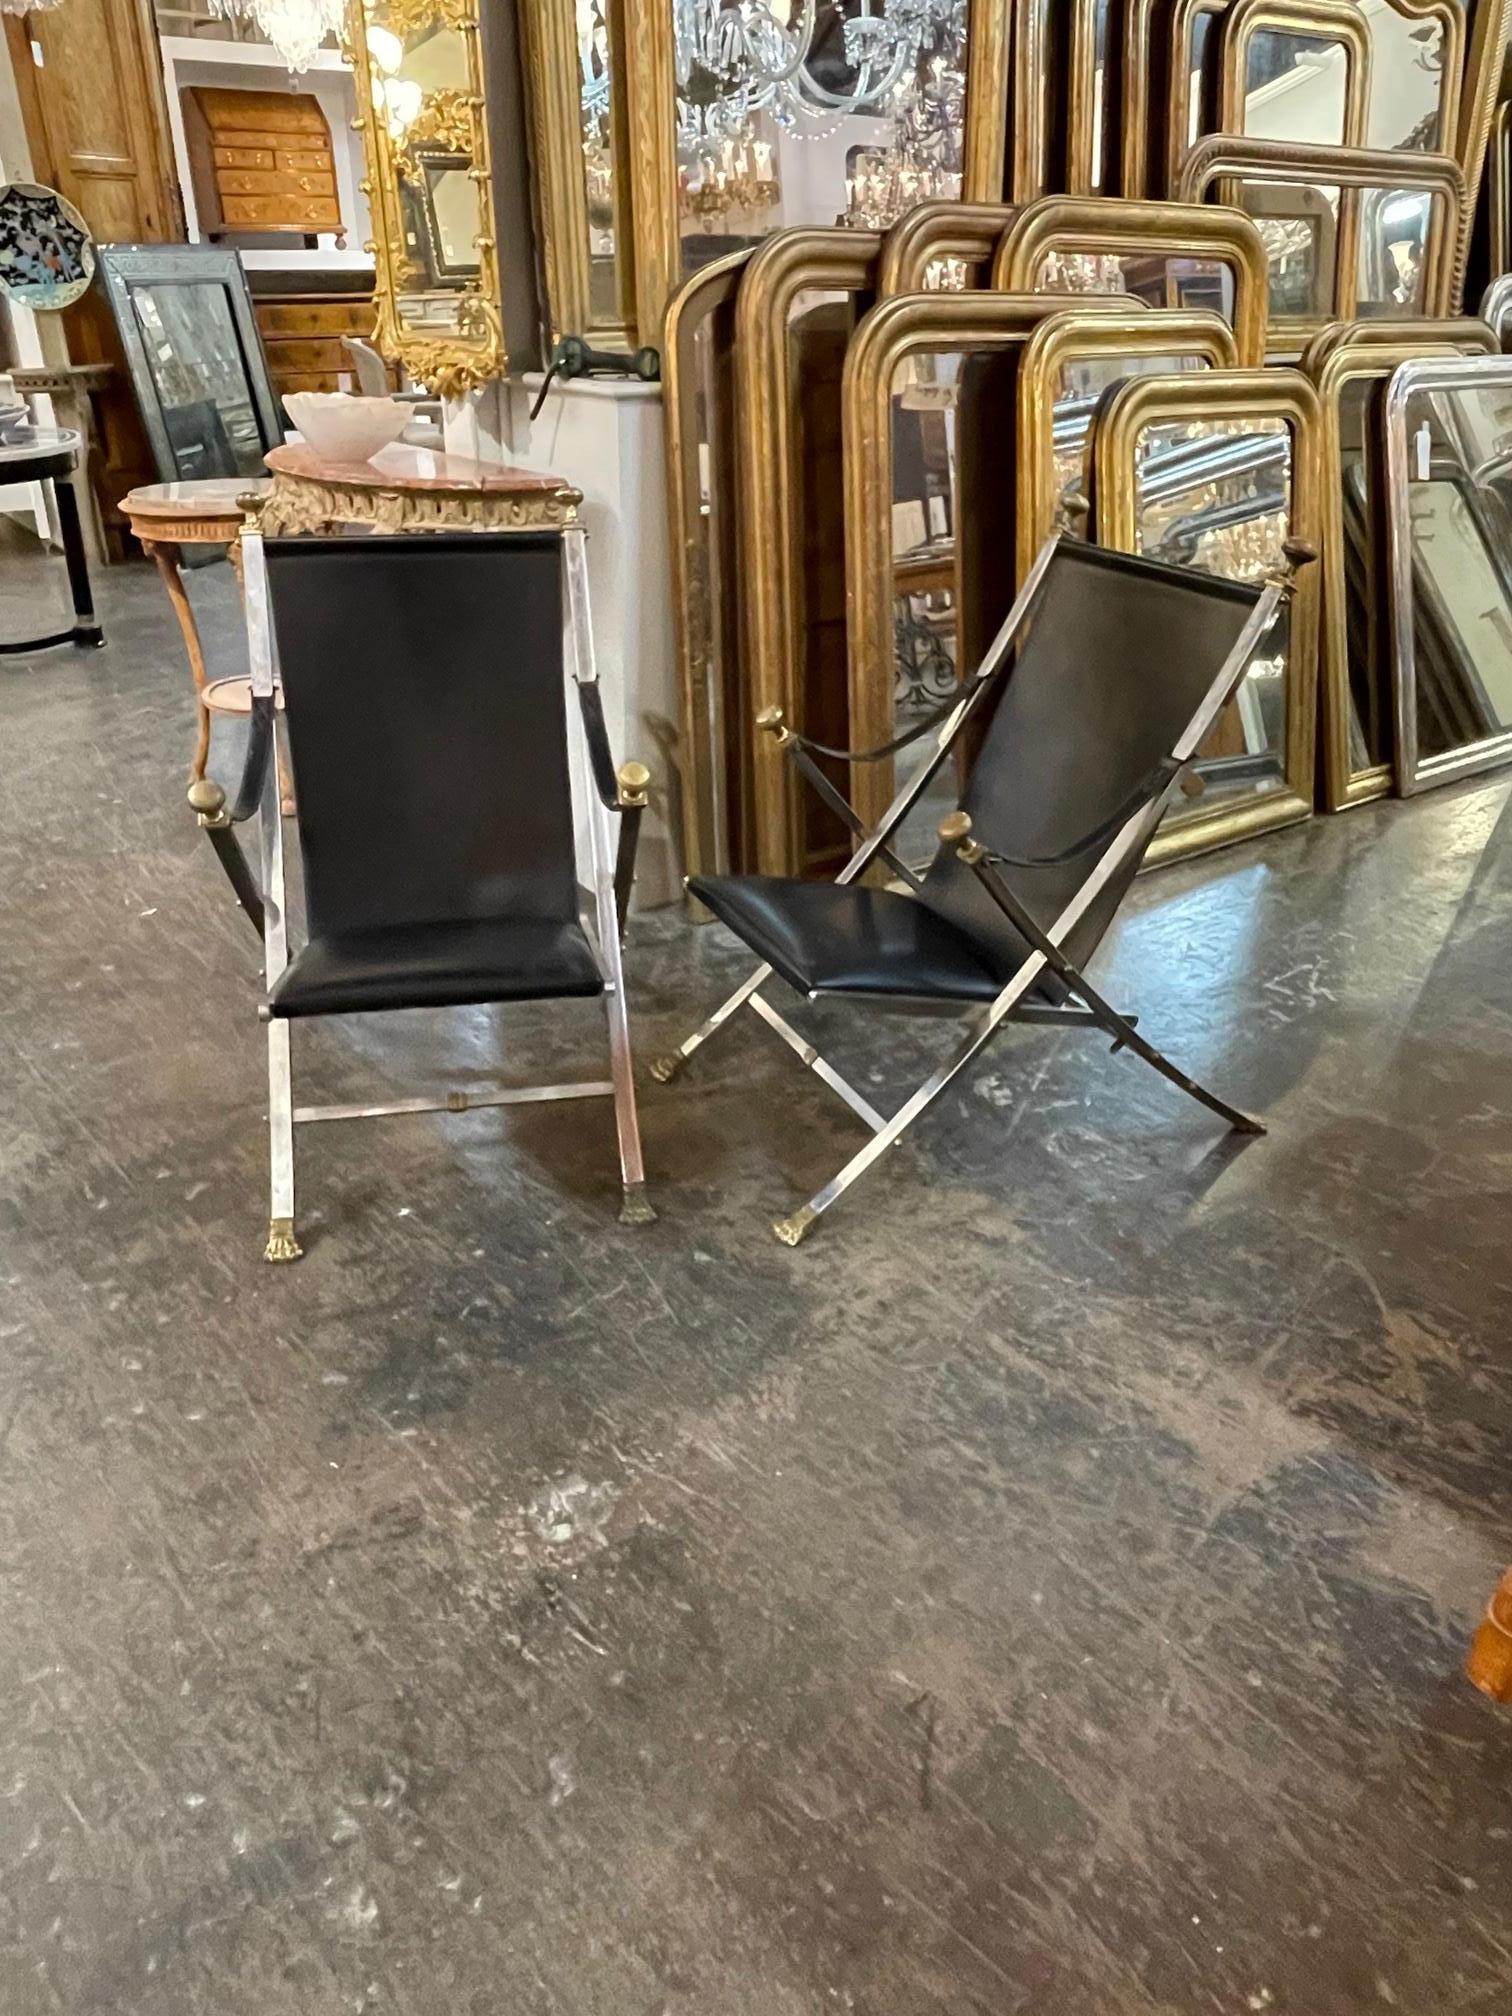 Rare pair of French Maison Jansen polished steel and leather folding chairs. Circa 1940. These are sure to make a statement in any space.